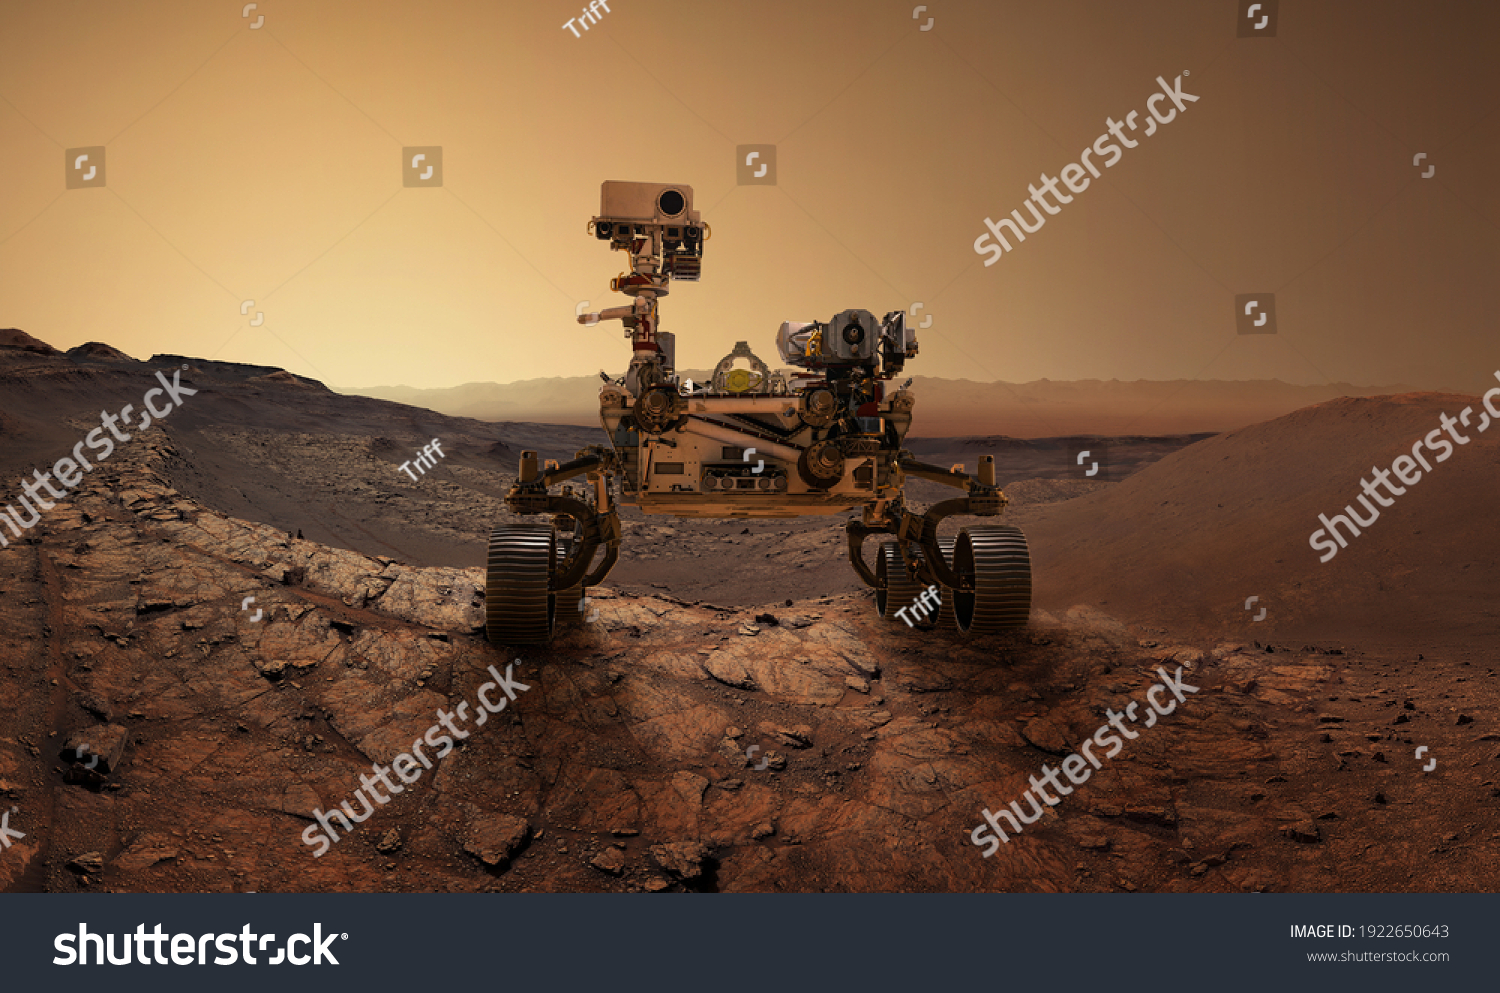  Mars 2020 Perseverance Rover is exploring surface of Mars. Perseverance rover Mission Mars exploration of red planet. Space exploration, science concept. .Elements of this image furnished by NASA. #1922650643